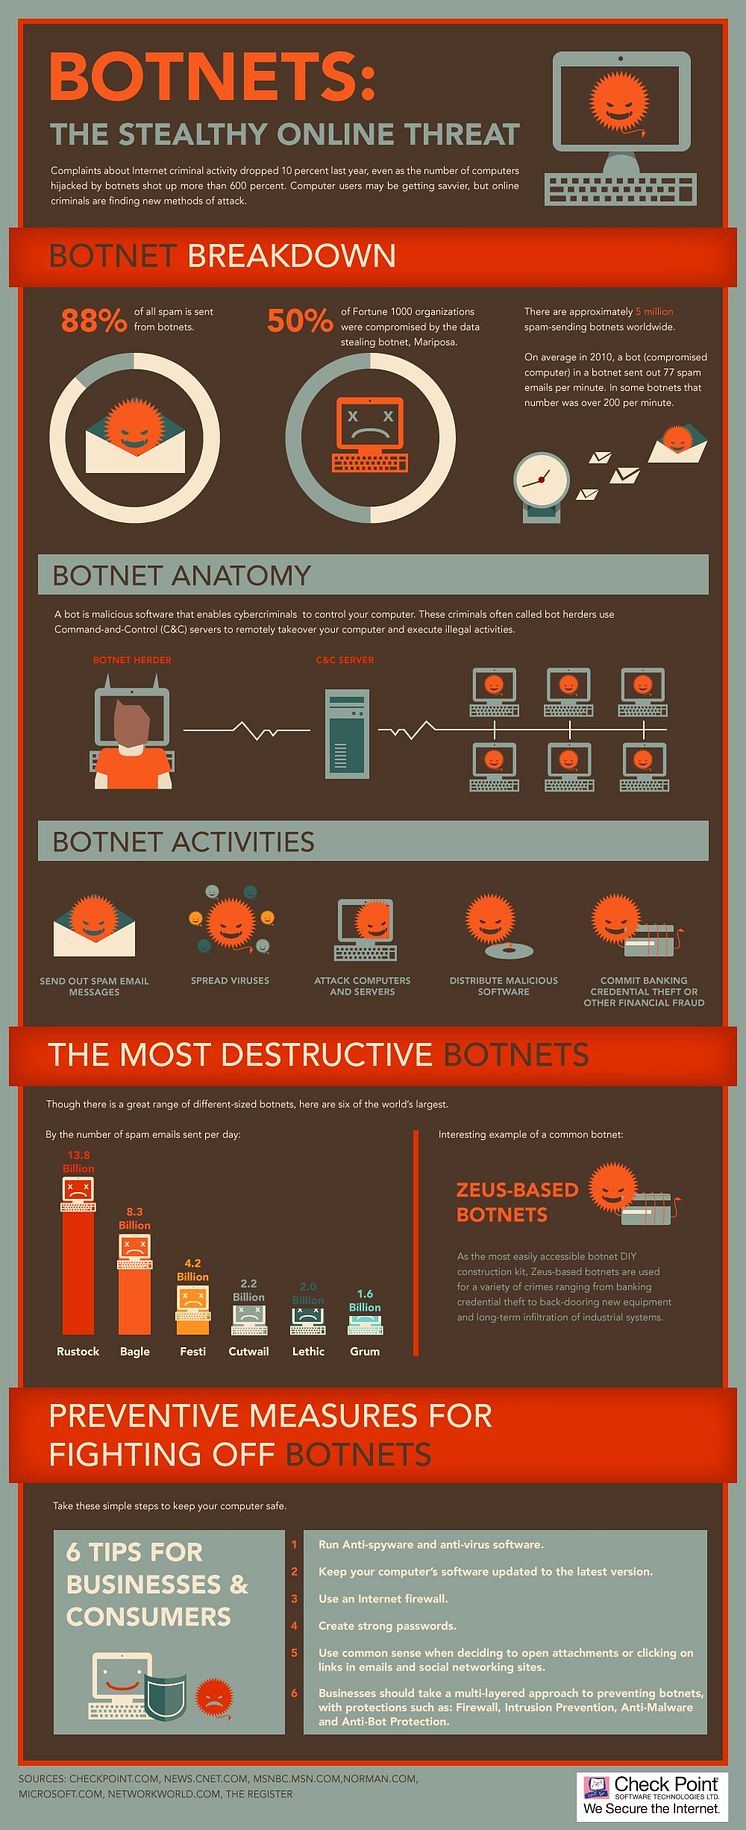 Botnets: The Stealthy online threat